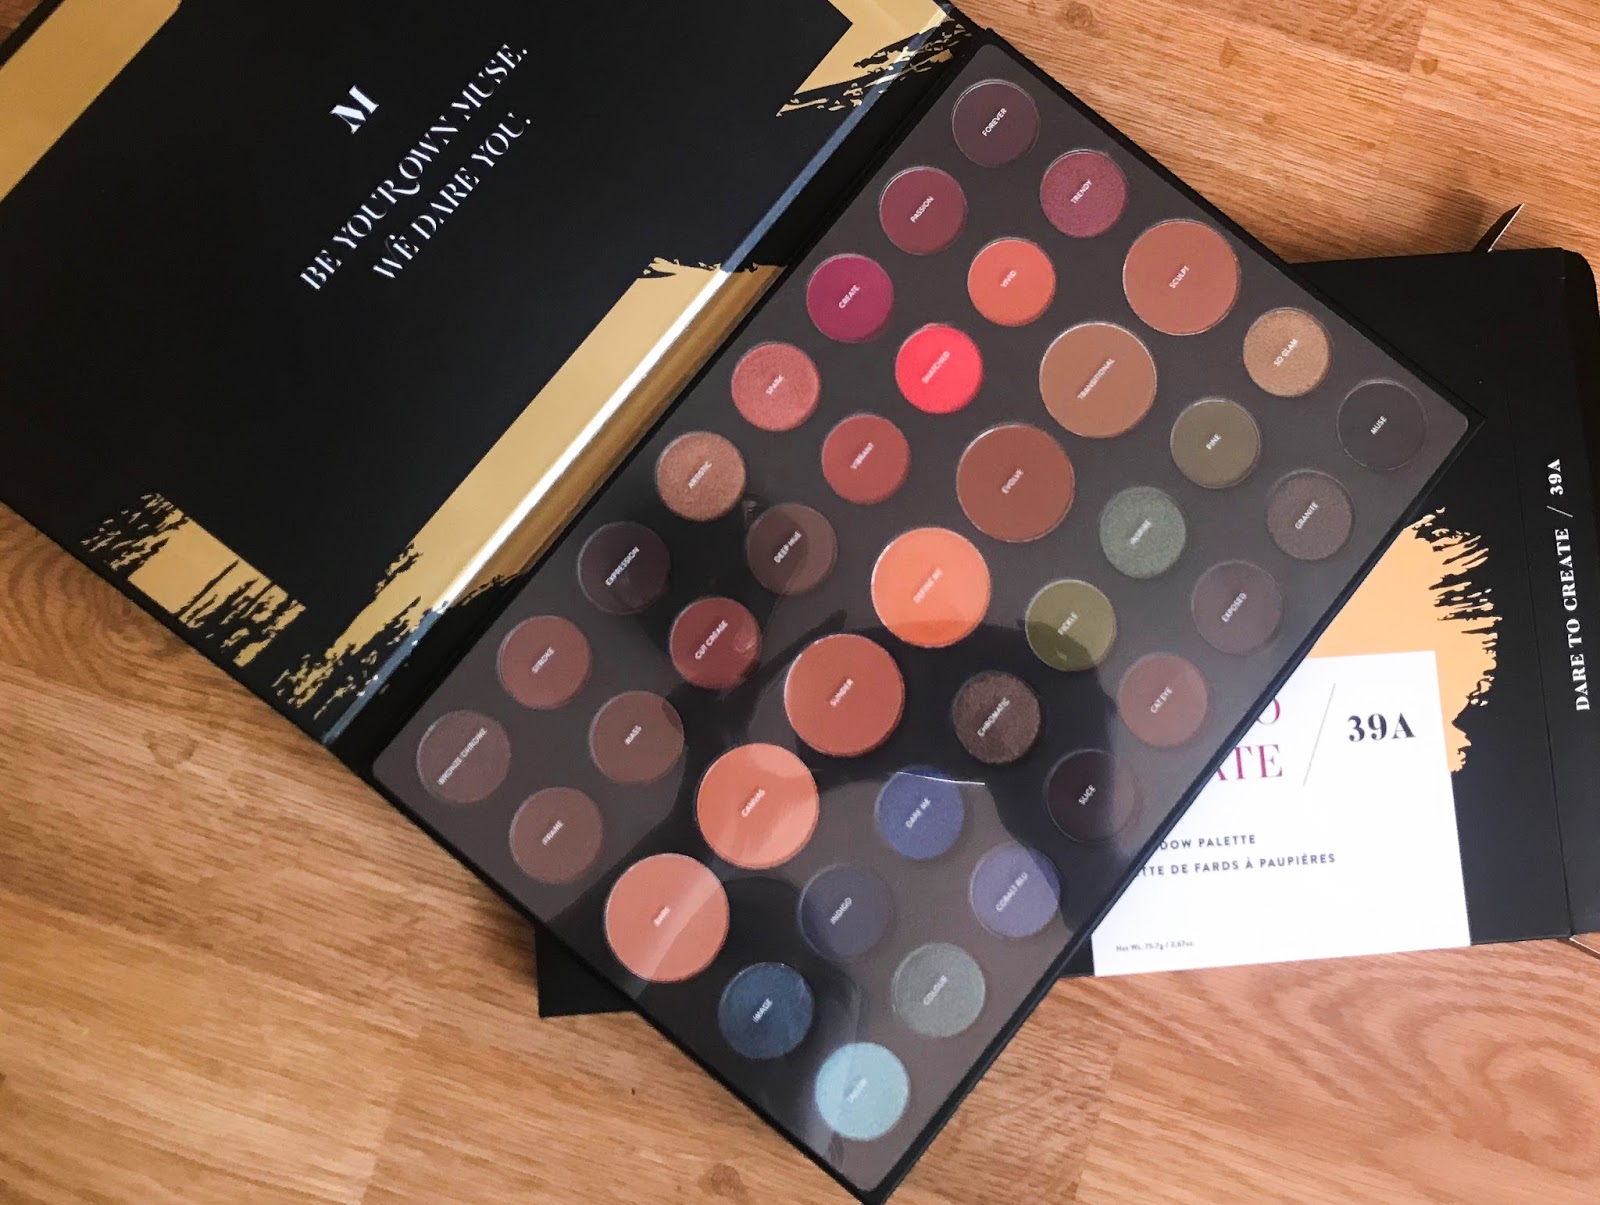 The Morphe 39A Palette. Review & Swatches.